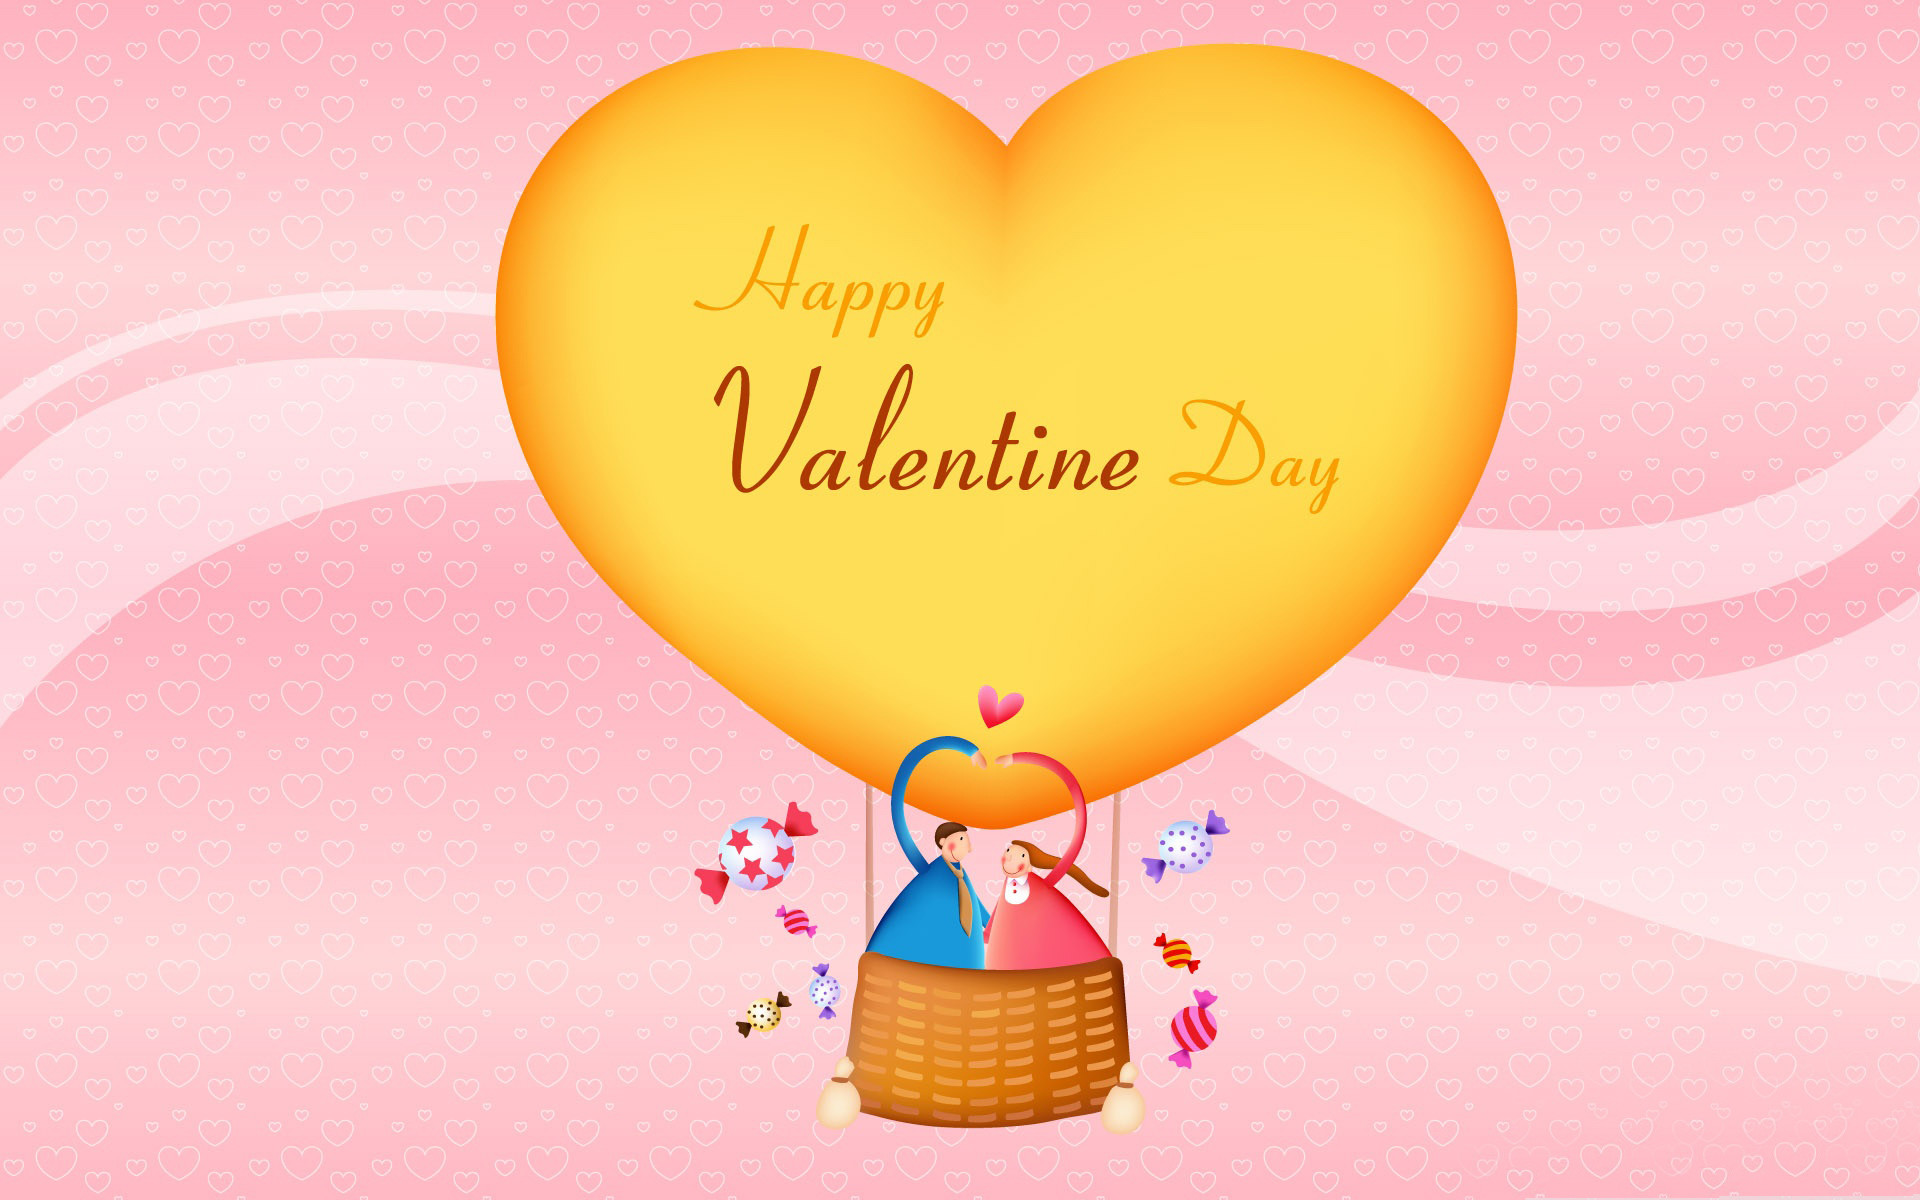 Valentine Day 2017 HD Images – Free download latest Valentine Day 2017 HD Images for Computer, Mobile, iPhone, iPad or any Gadget at WallpapersChar